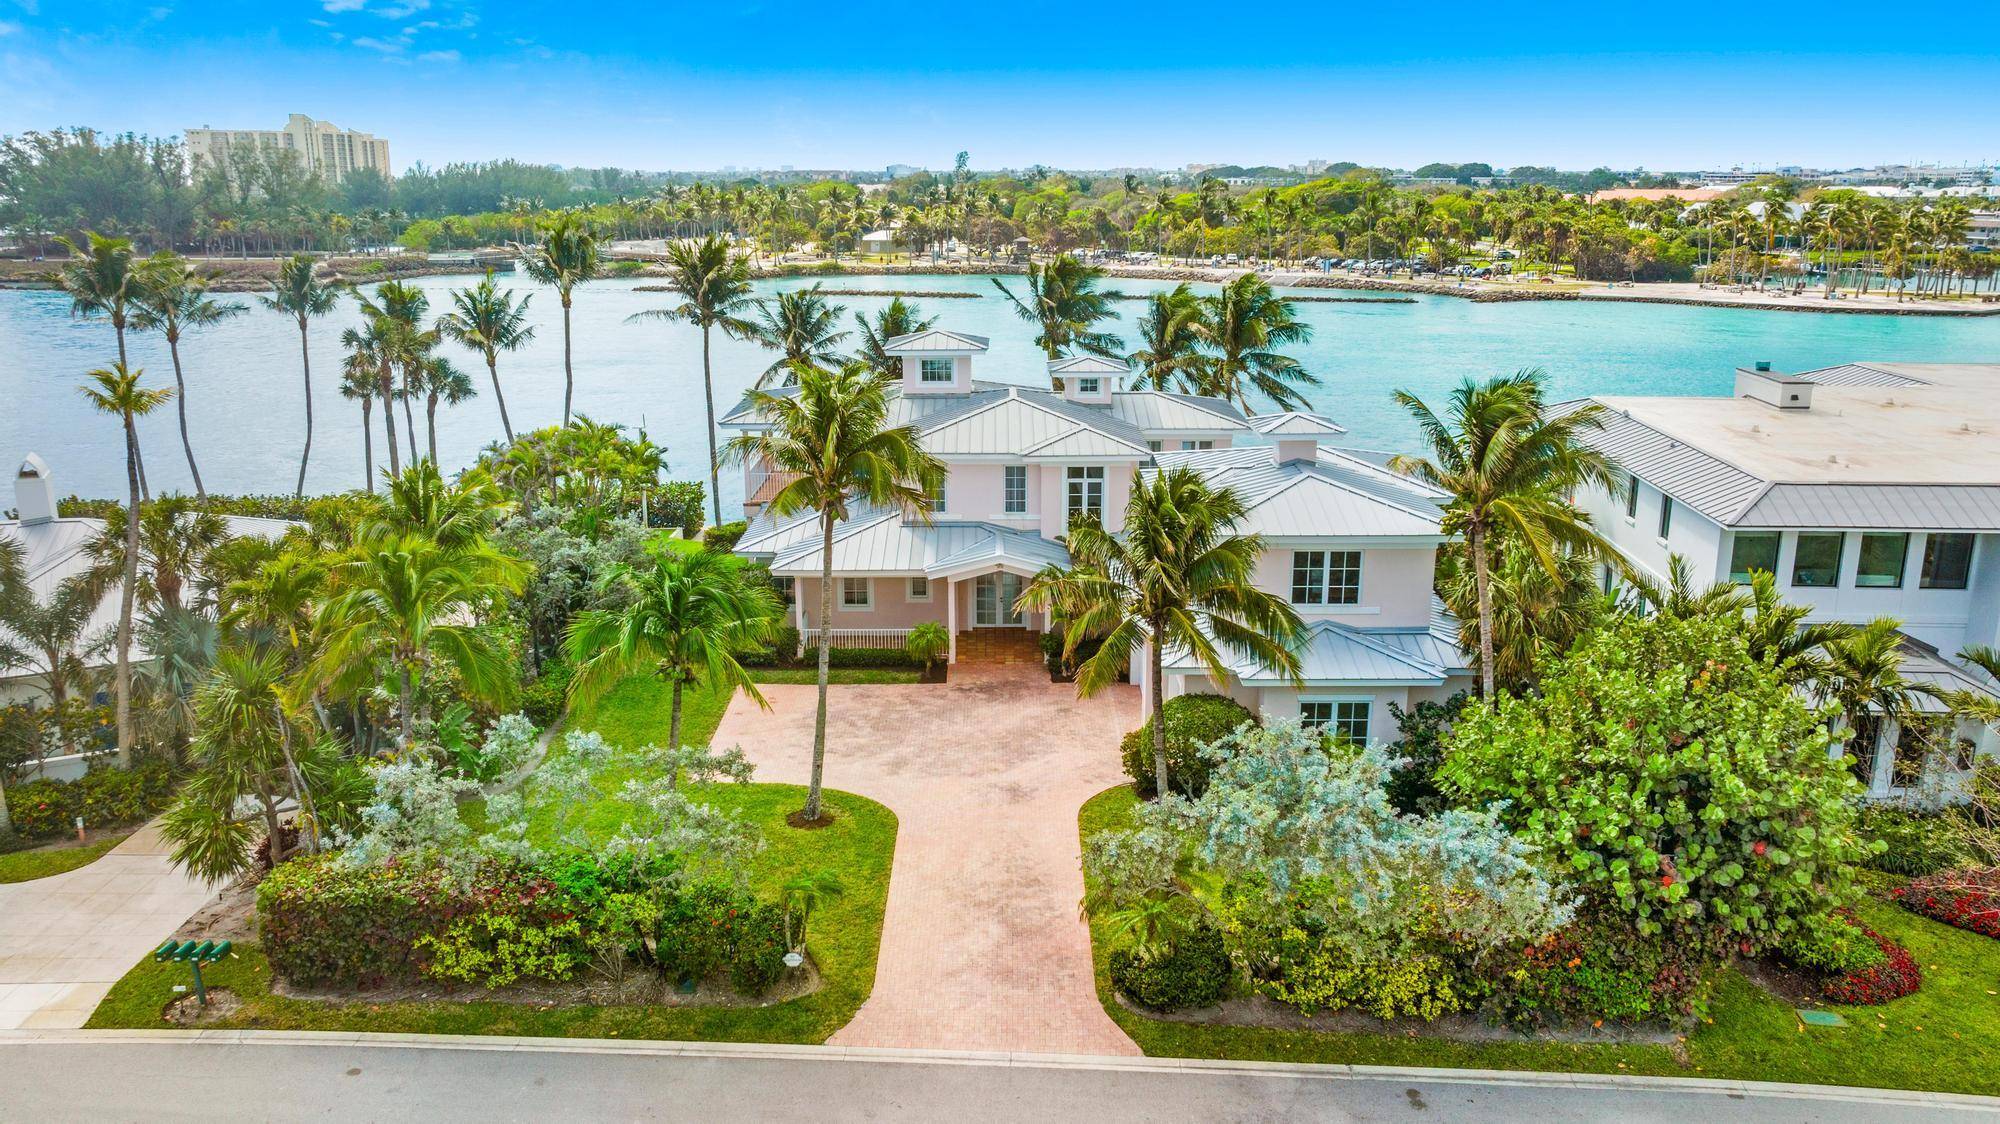 Spectacular WATERFRONT LOCATION AND VIEWS overlooking the Jupiter INLET at Jupiter Inlet Beach Colony on the south end of Jupiter Island.